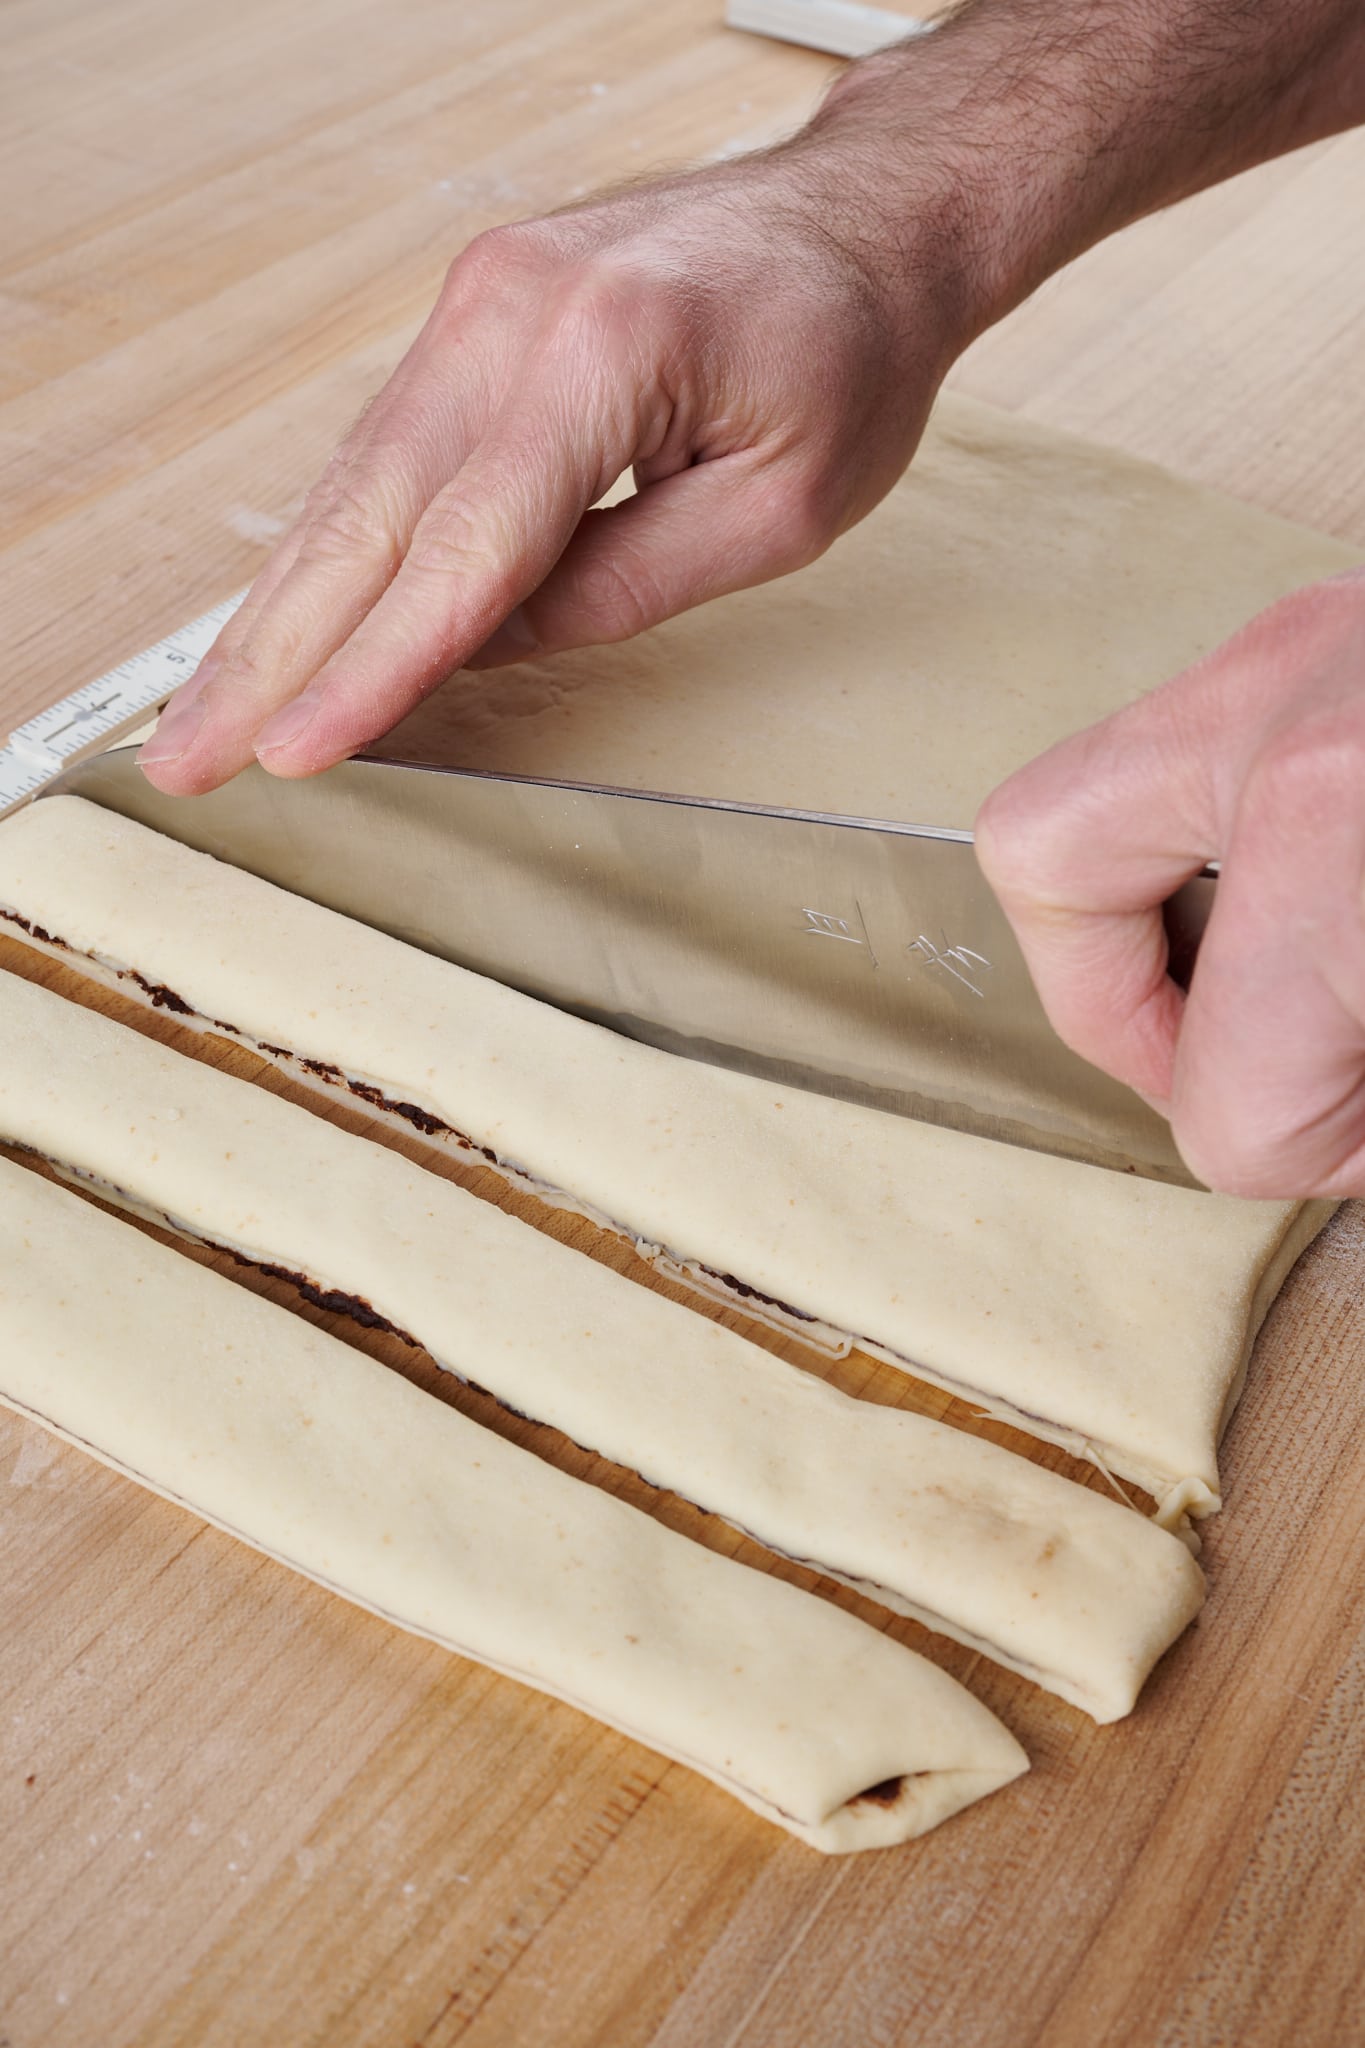 Cutting, twisting, and knotting dough